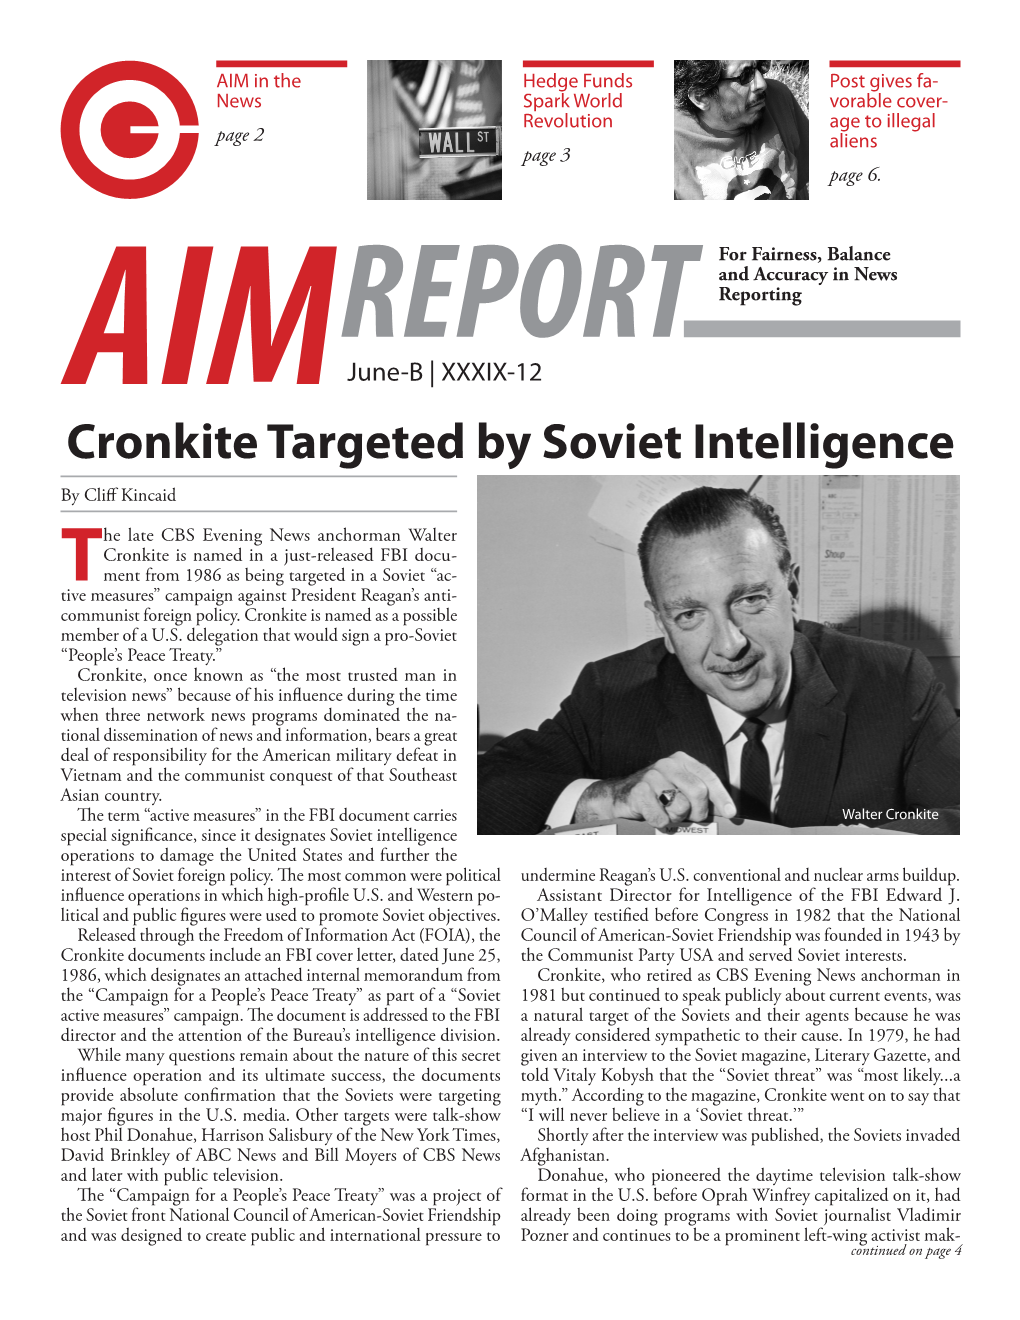 Cronkite Targeted by Soviet Intelligence by Cliff Kincaid